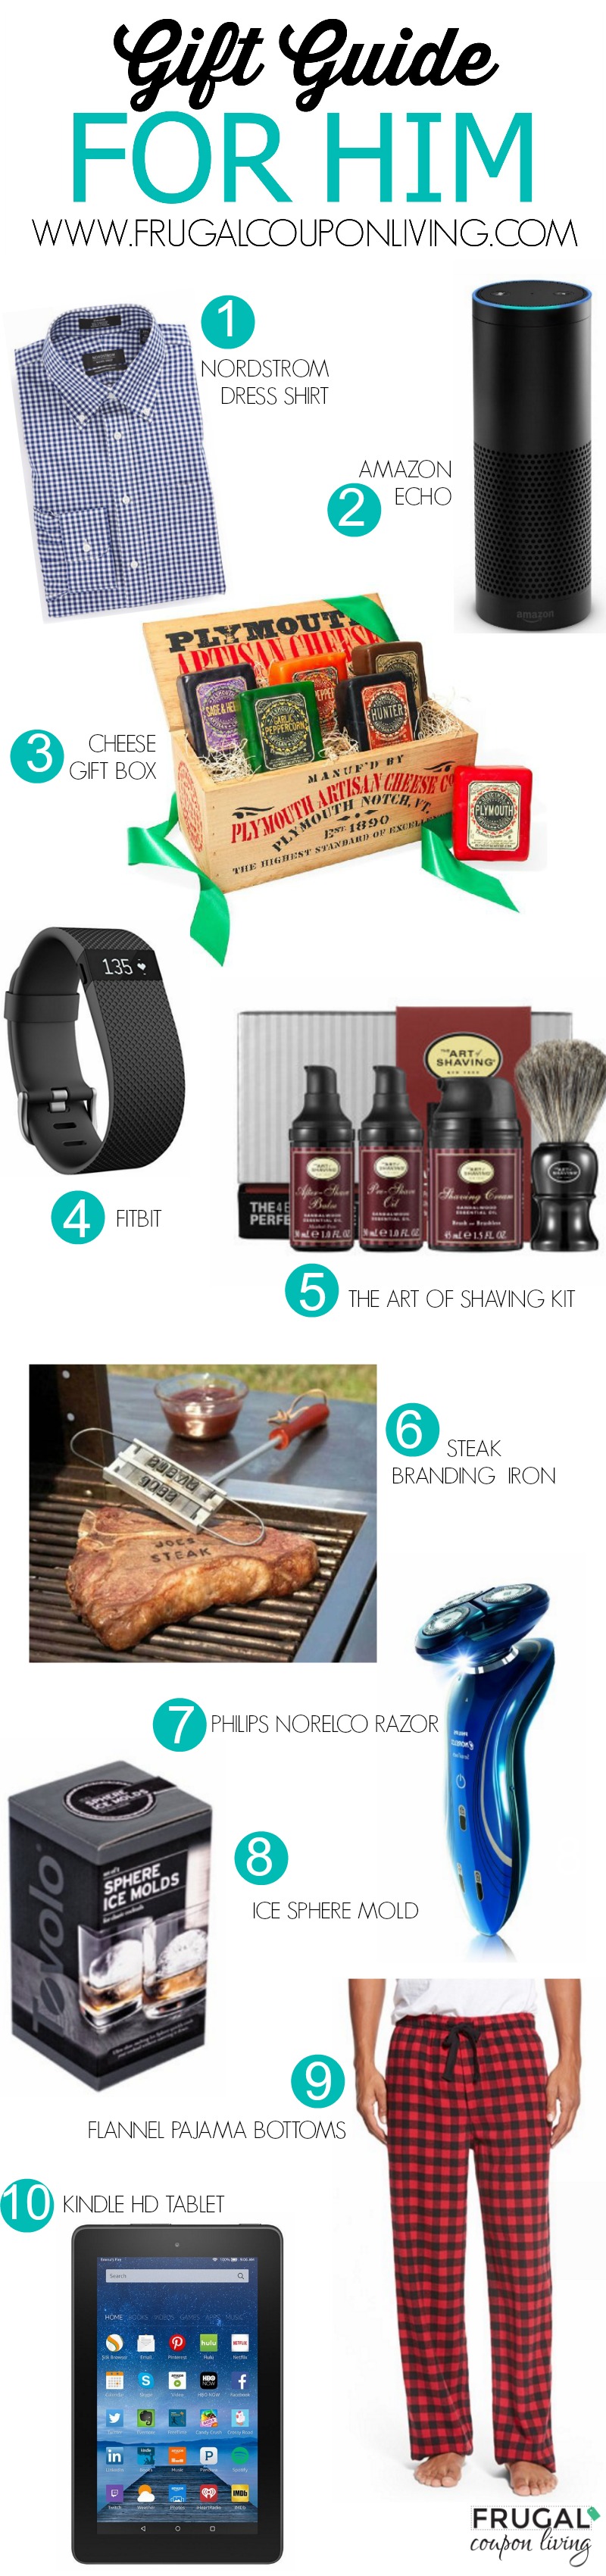 gift-guide-for-him-final-frugal-coupon-living